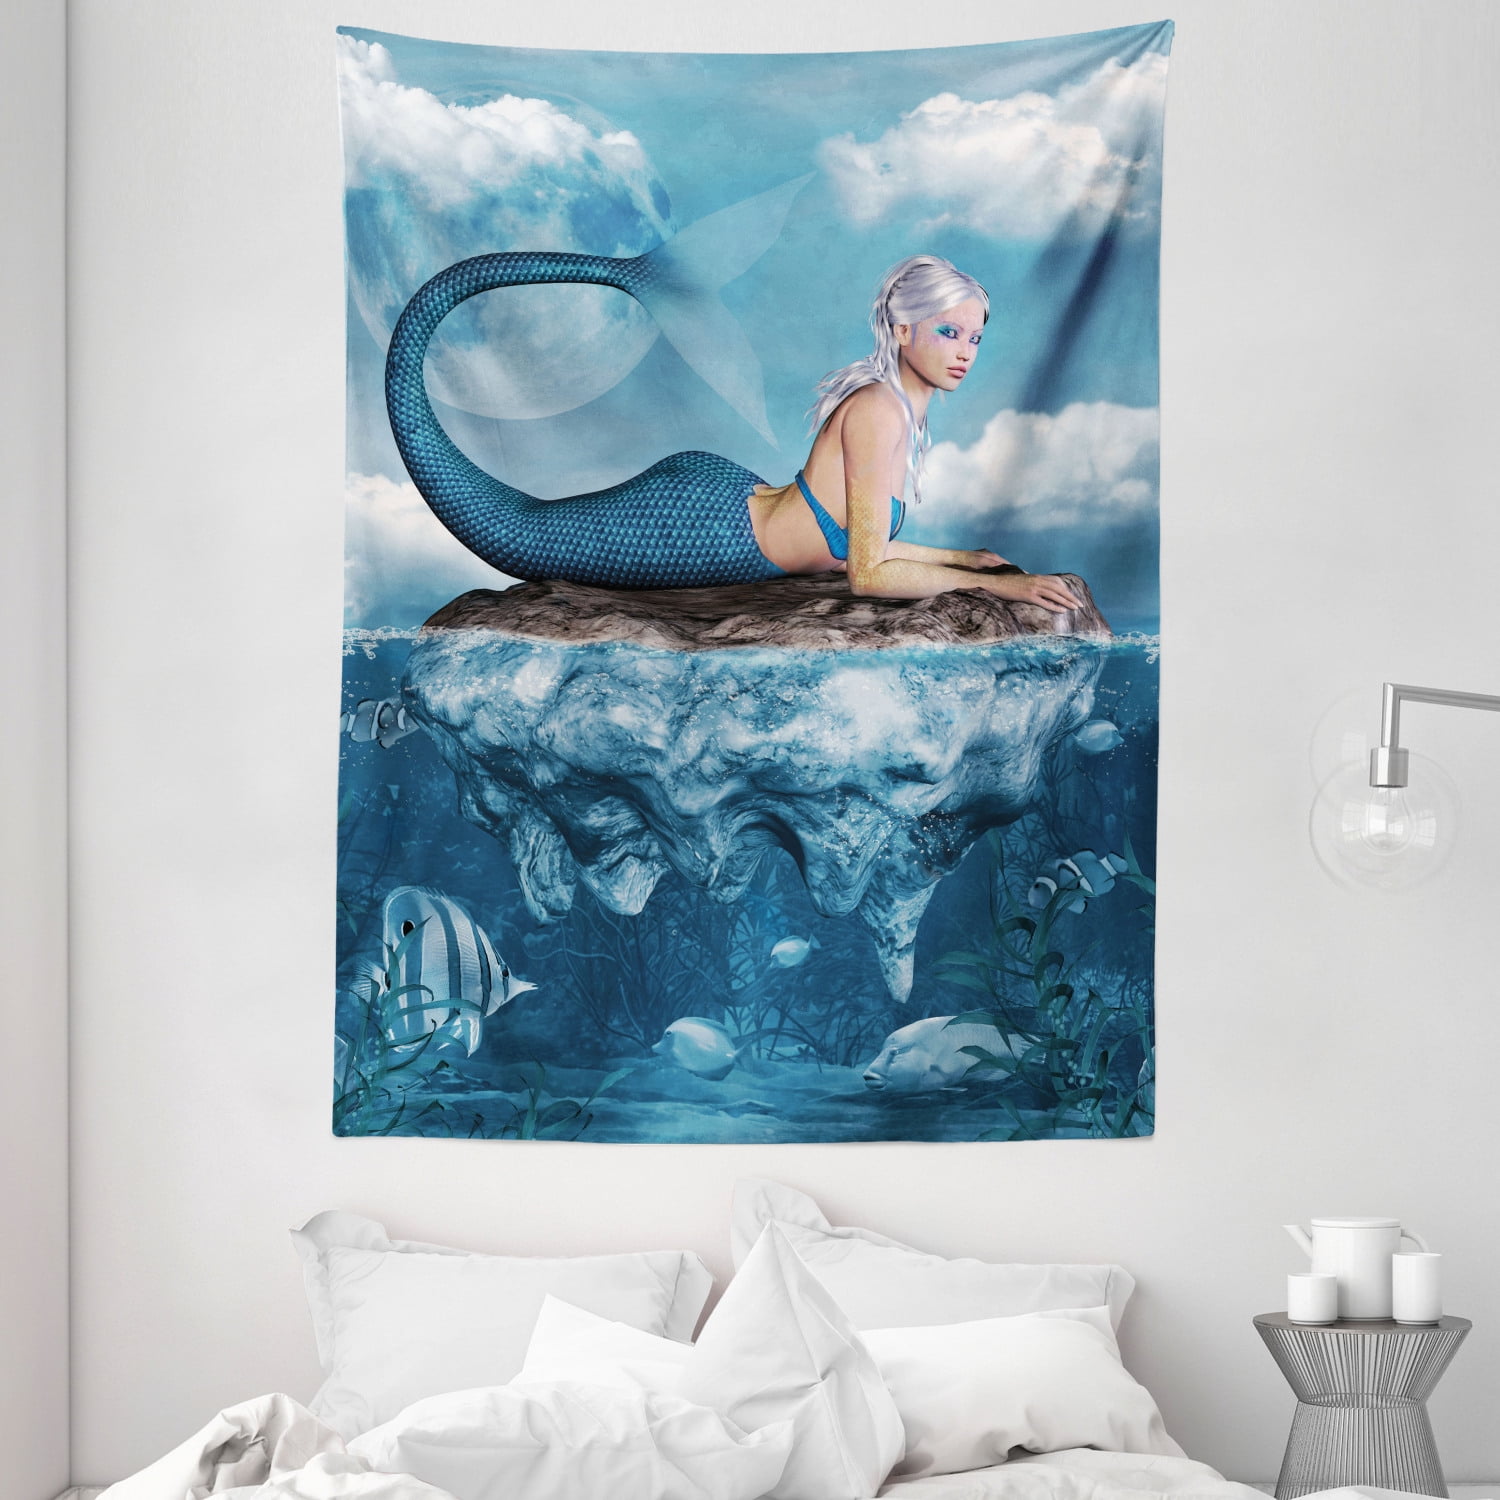 Ocean Mermaid girl sailboat Hippie Tapestry Wall Hanging Home Room Decor 3 Sizes 